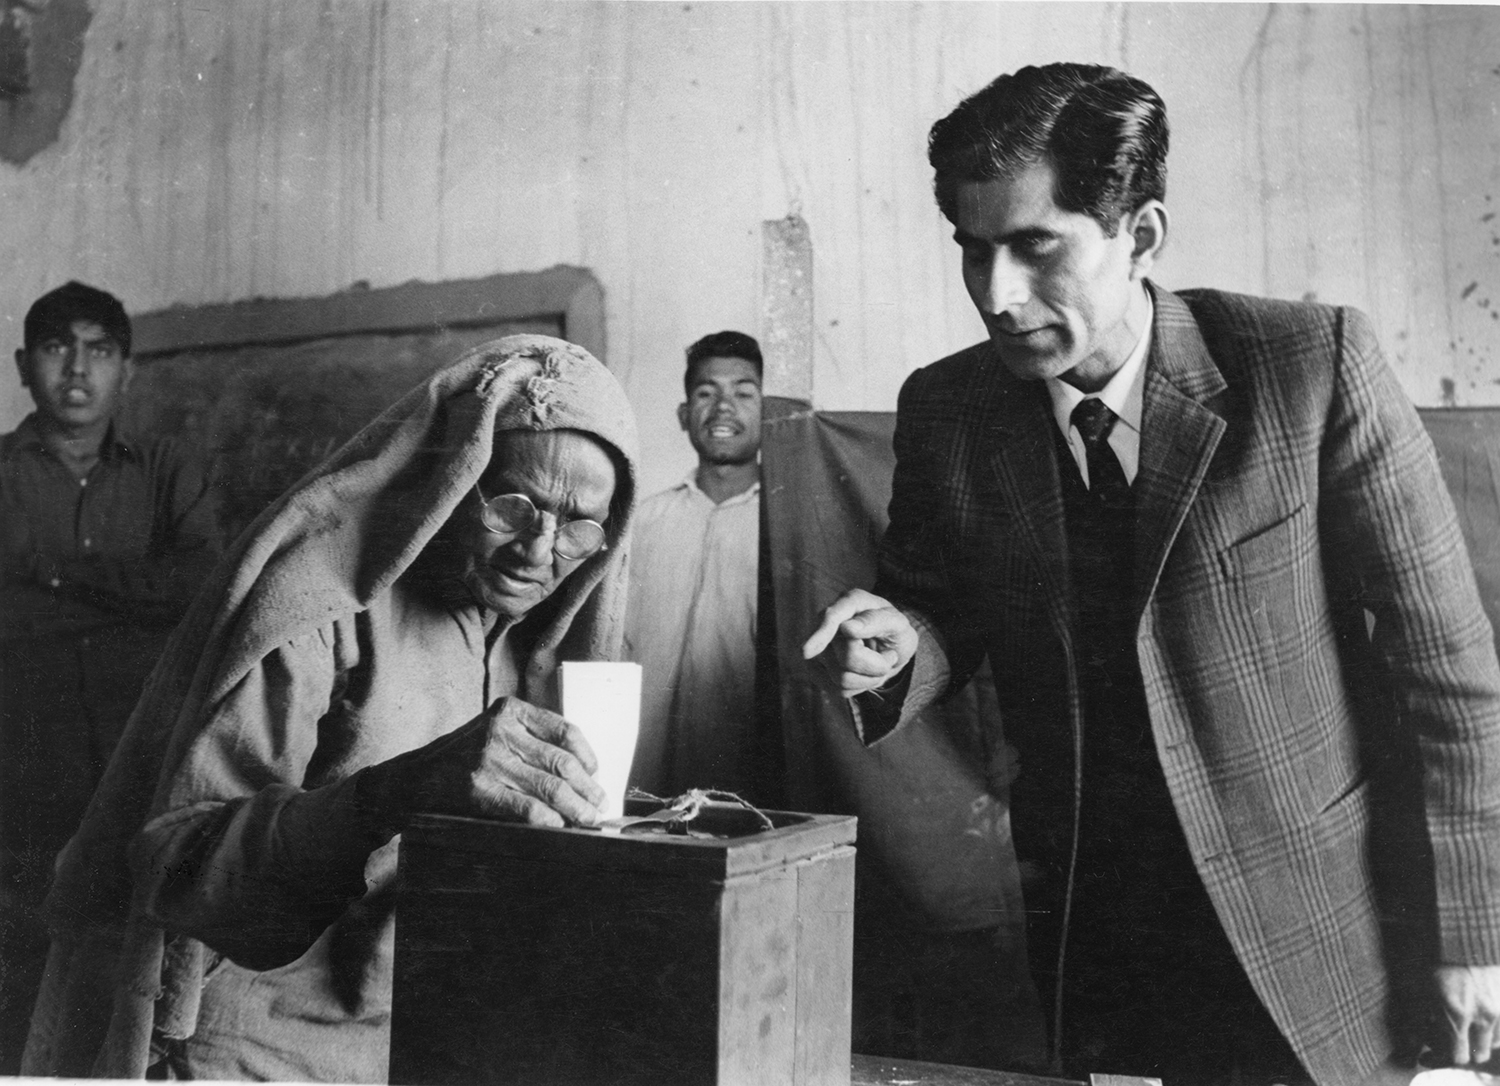 Polling Booth, Haryana TS Satyan, Indian, 1923-2009 1972 Haryana, India Silver gelatin print PHY.07855 Gifted by the TS Satyan Family Trust. (Museum of Art & Photography, Bengaluru)